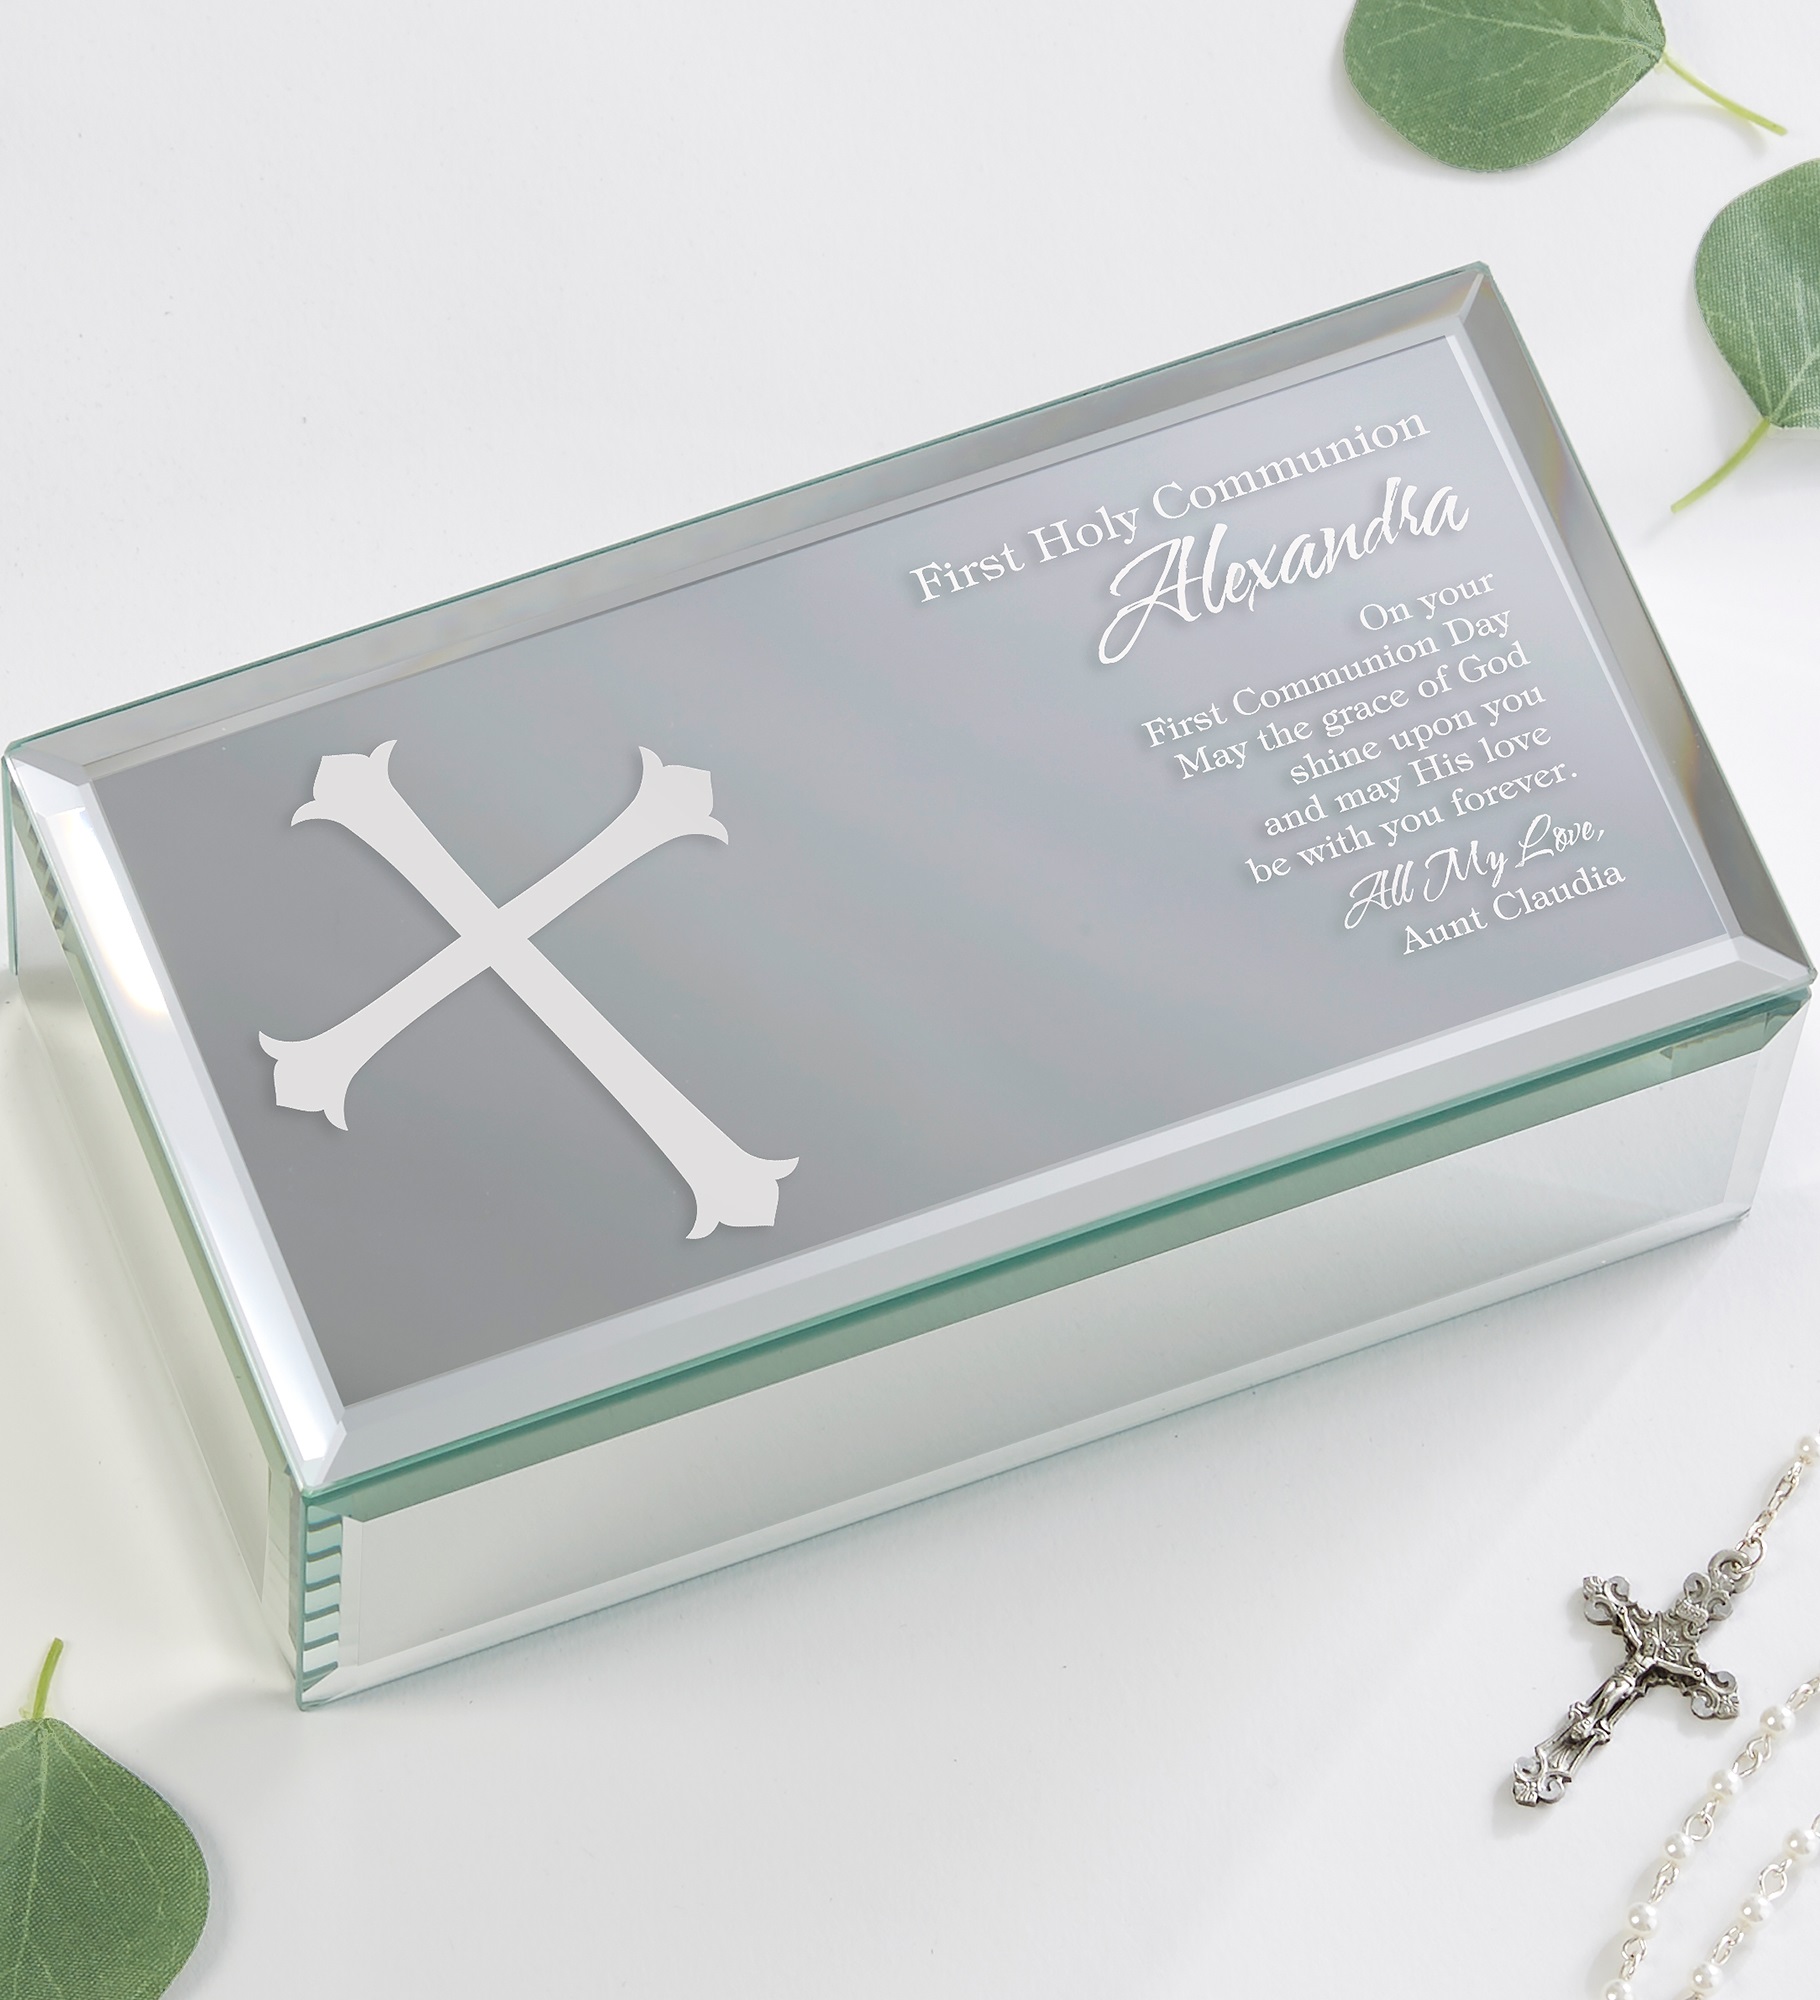 First Communion Blessing Engraved Mirrored Storage Box